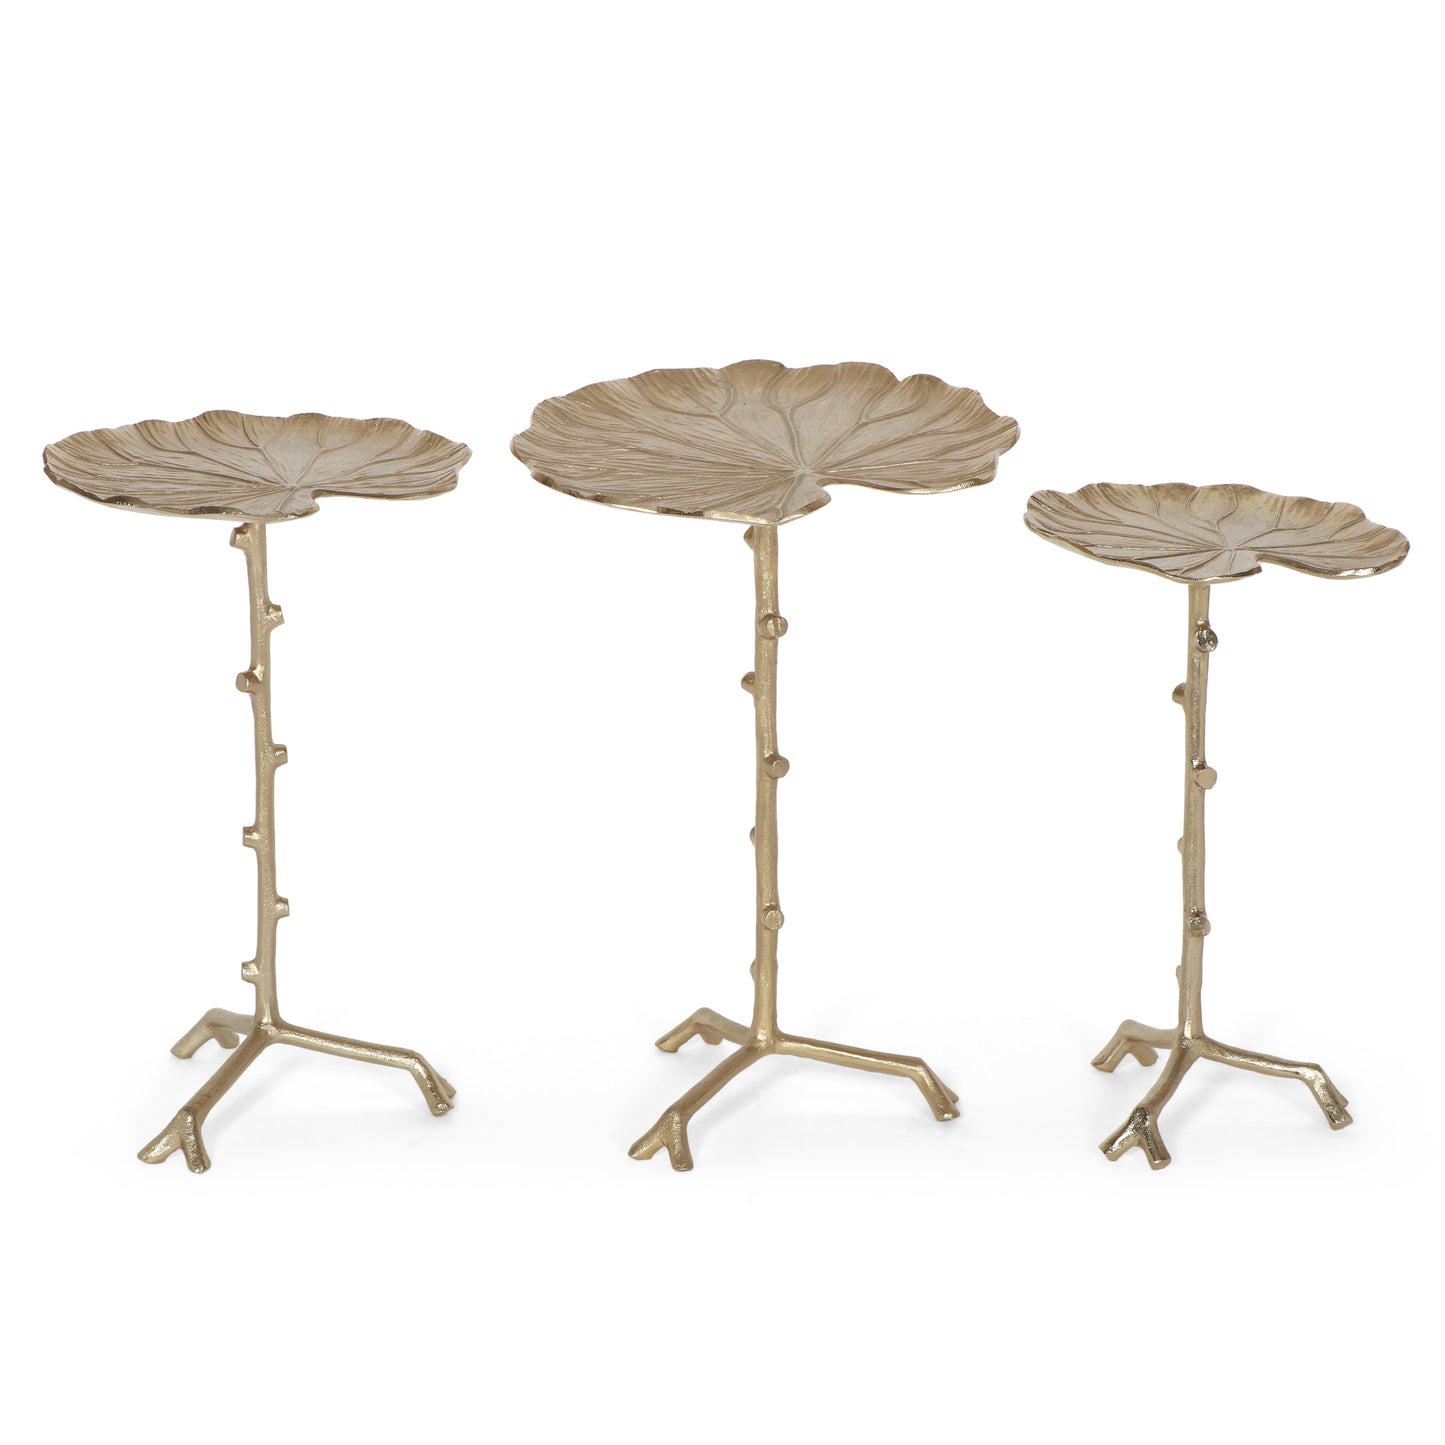 Malinta Boho Glam Handcrafted Aluminum Lily Pad Side Tables (Set of 3), Antique Gold